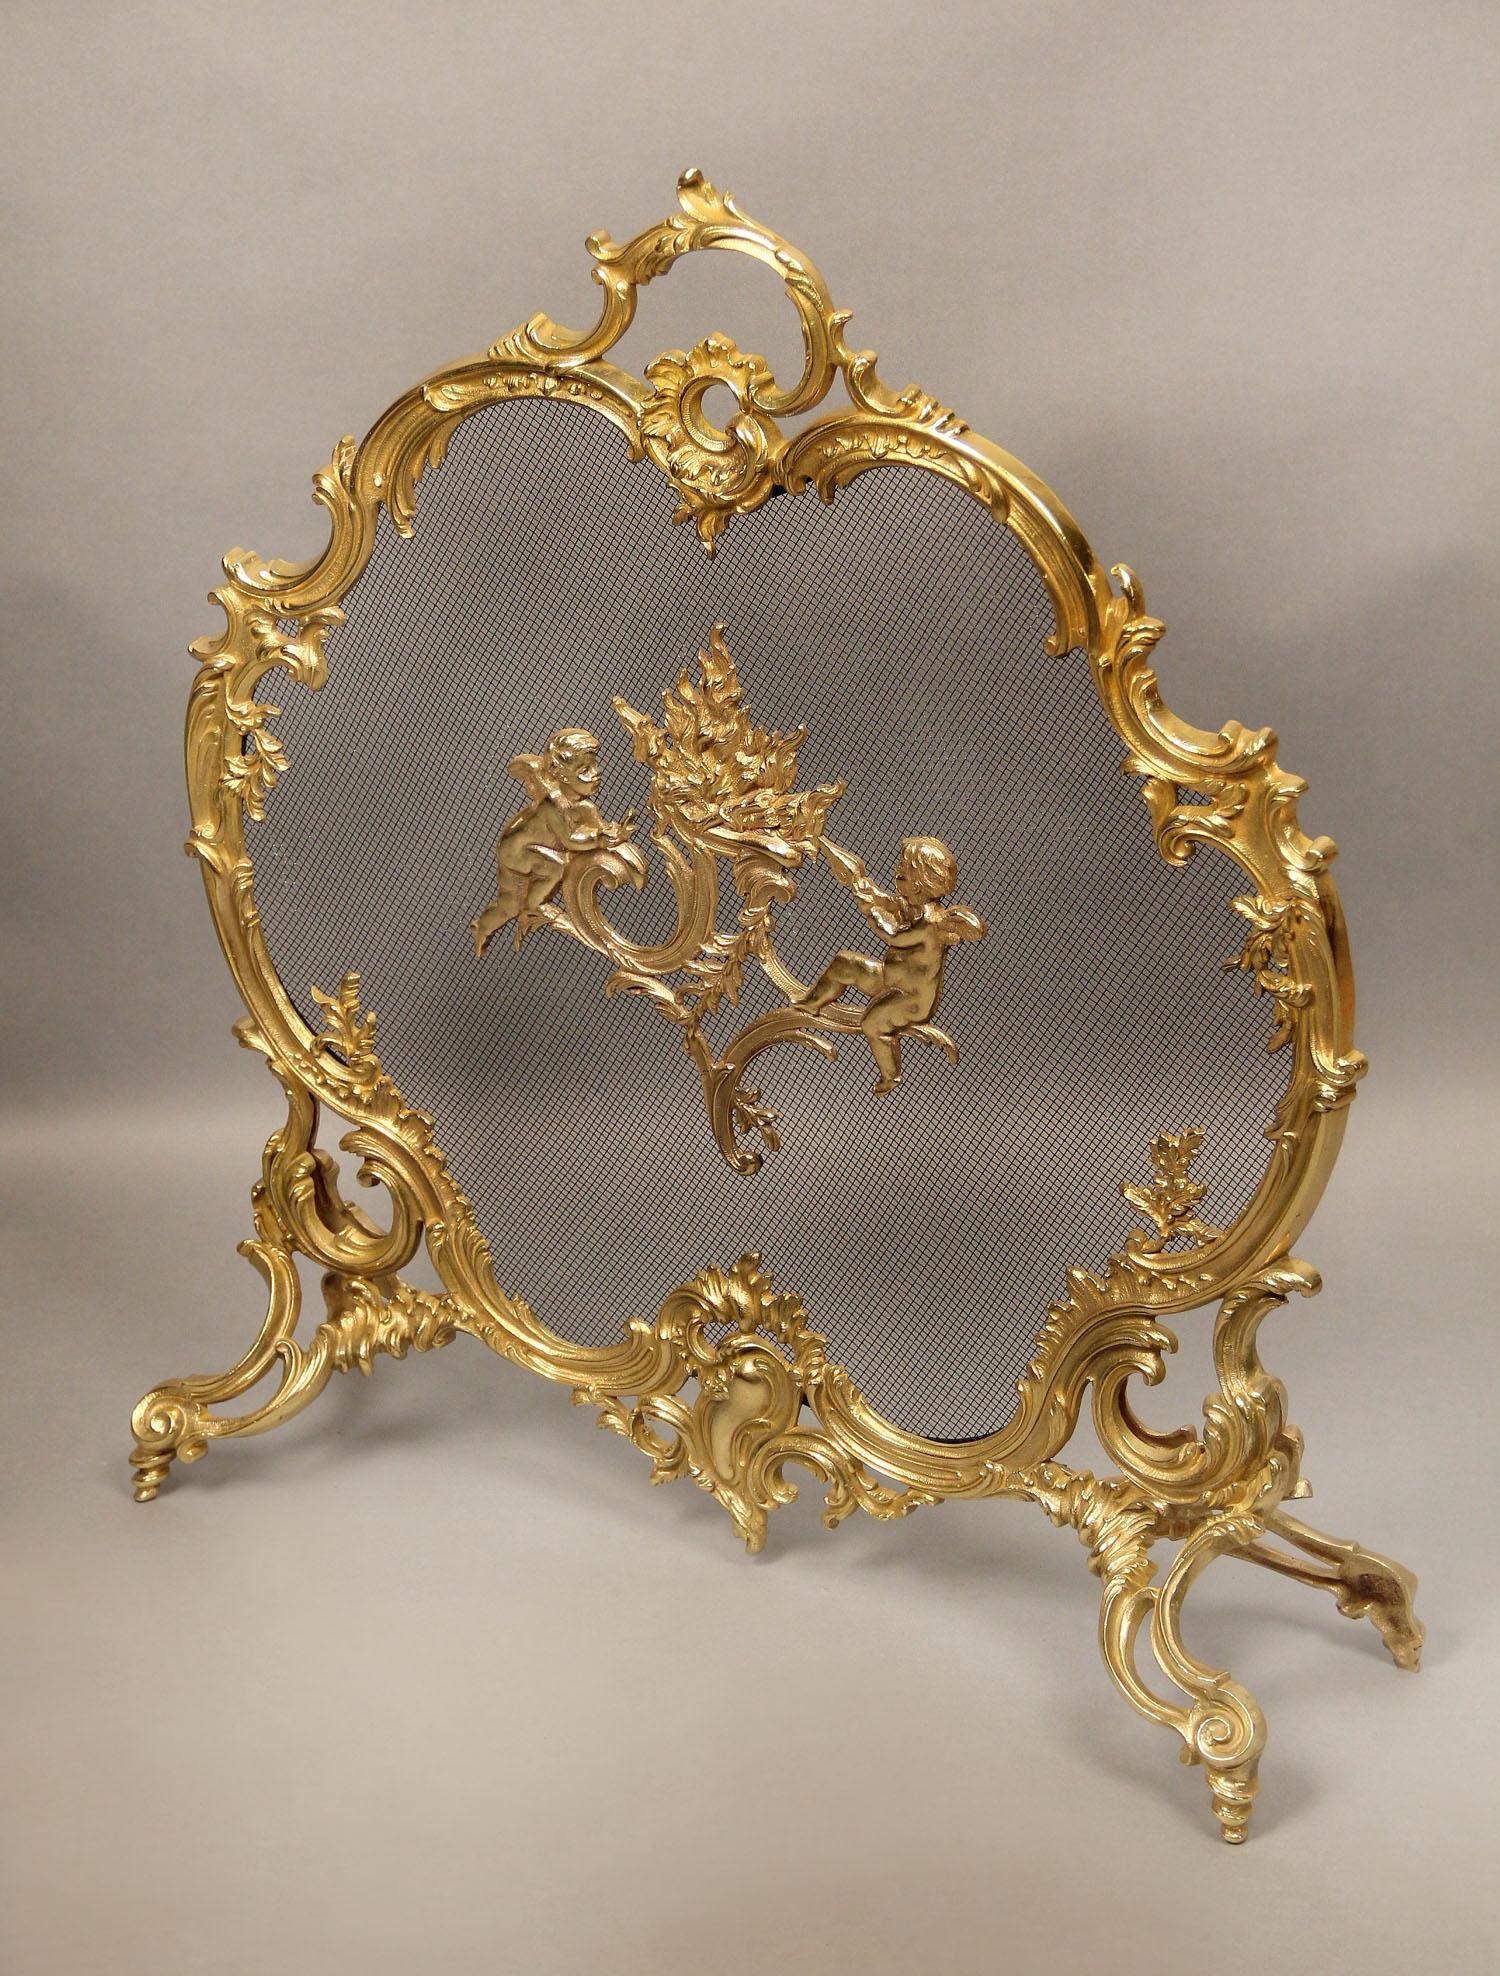 A Nice late 19th century gilt bronze firescreen

The Rococo oval shaped scrolling bronze frame centered with cherubs fanning a flame, standing on four spiral feet.